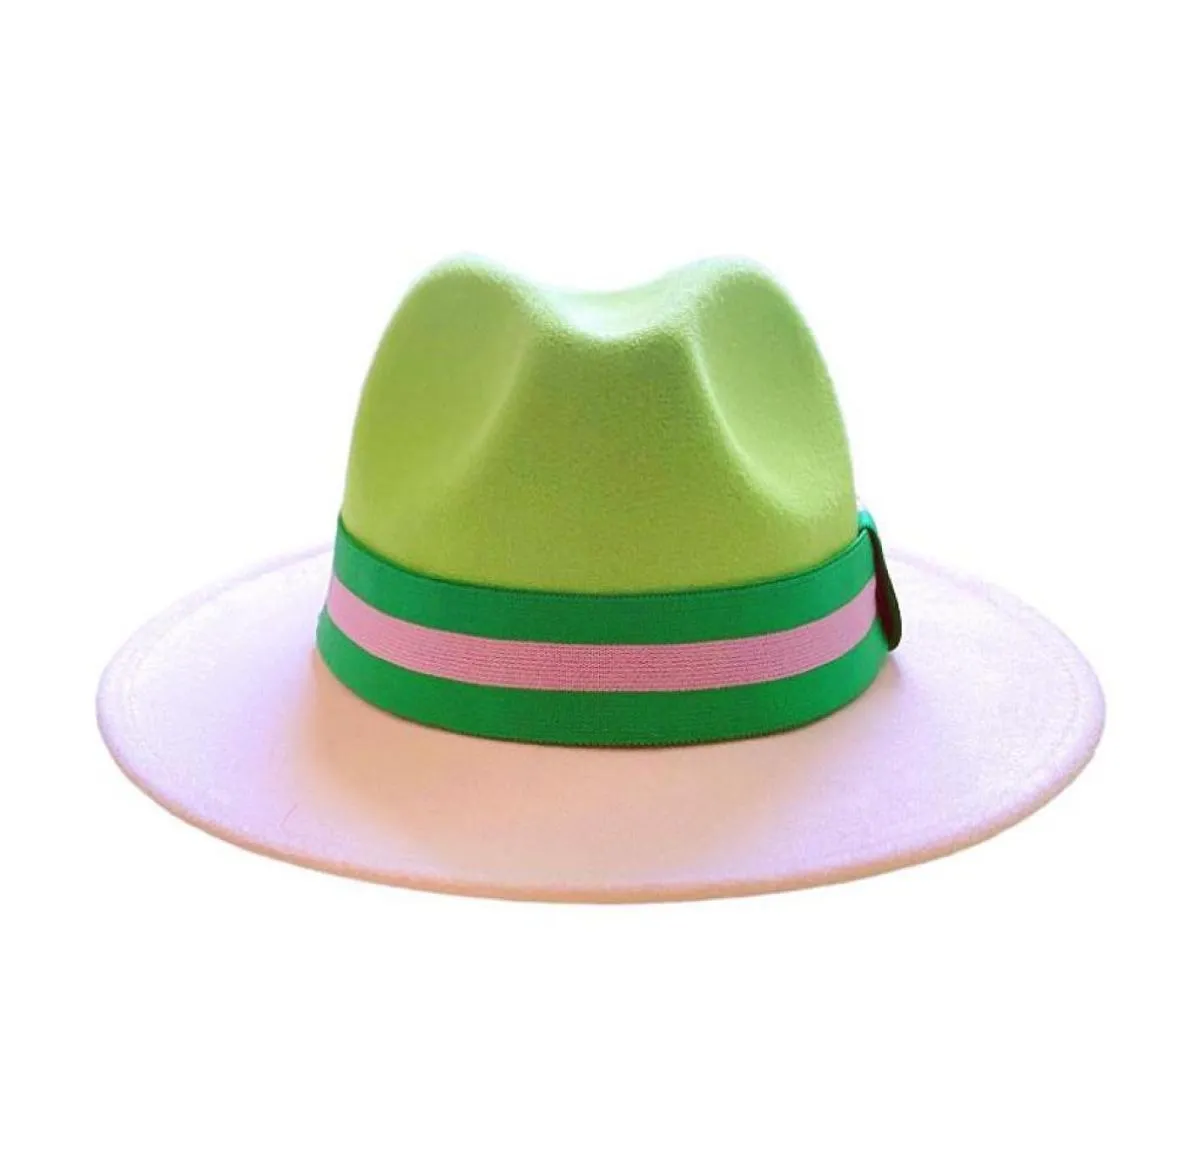 Wide Brim Hats Patchwork Fedora Hat Colorful Two Tone Unisex Men Womens Panama Green Pink British Style Trilby Party Formal Cap5116498